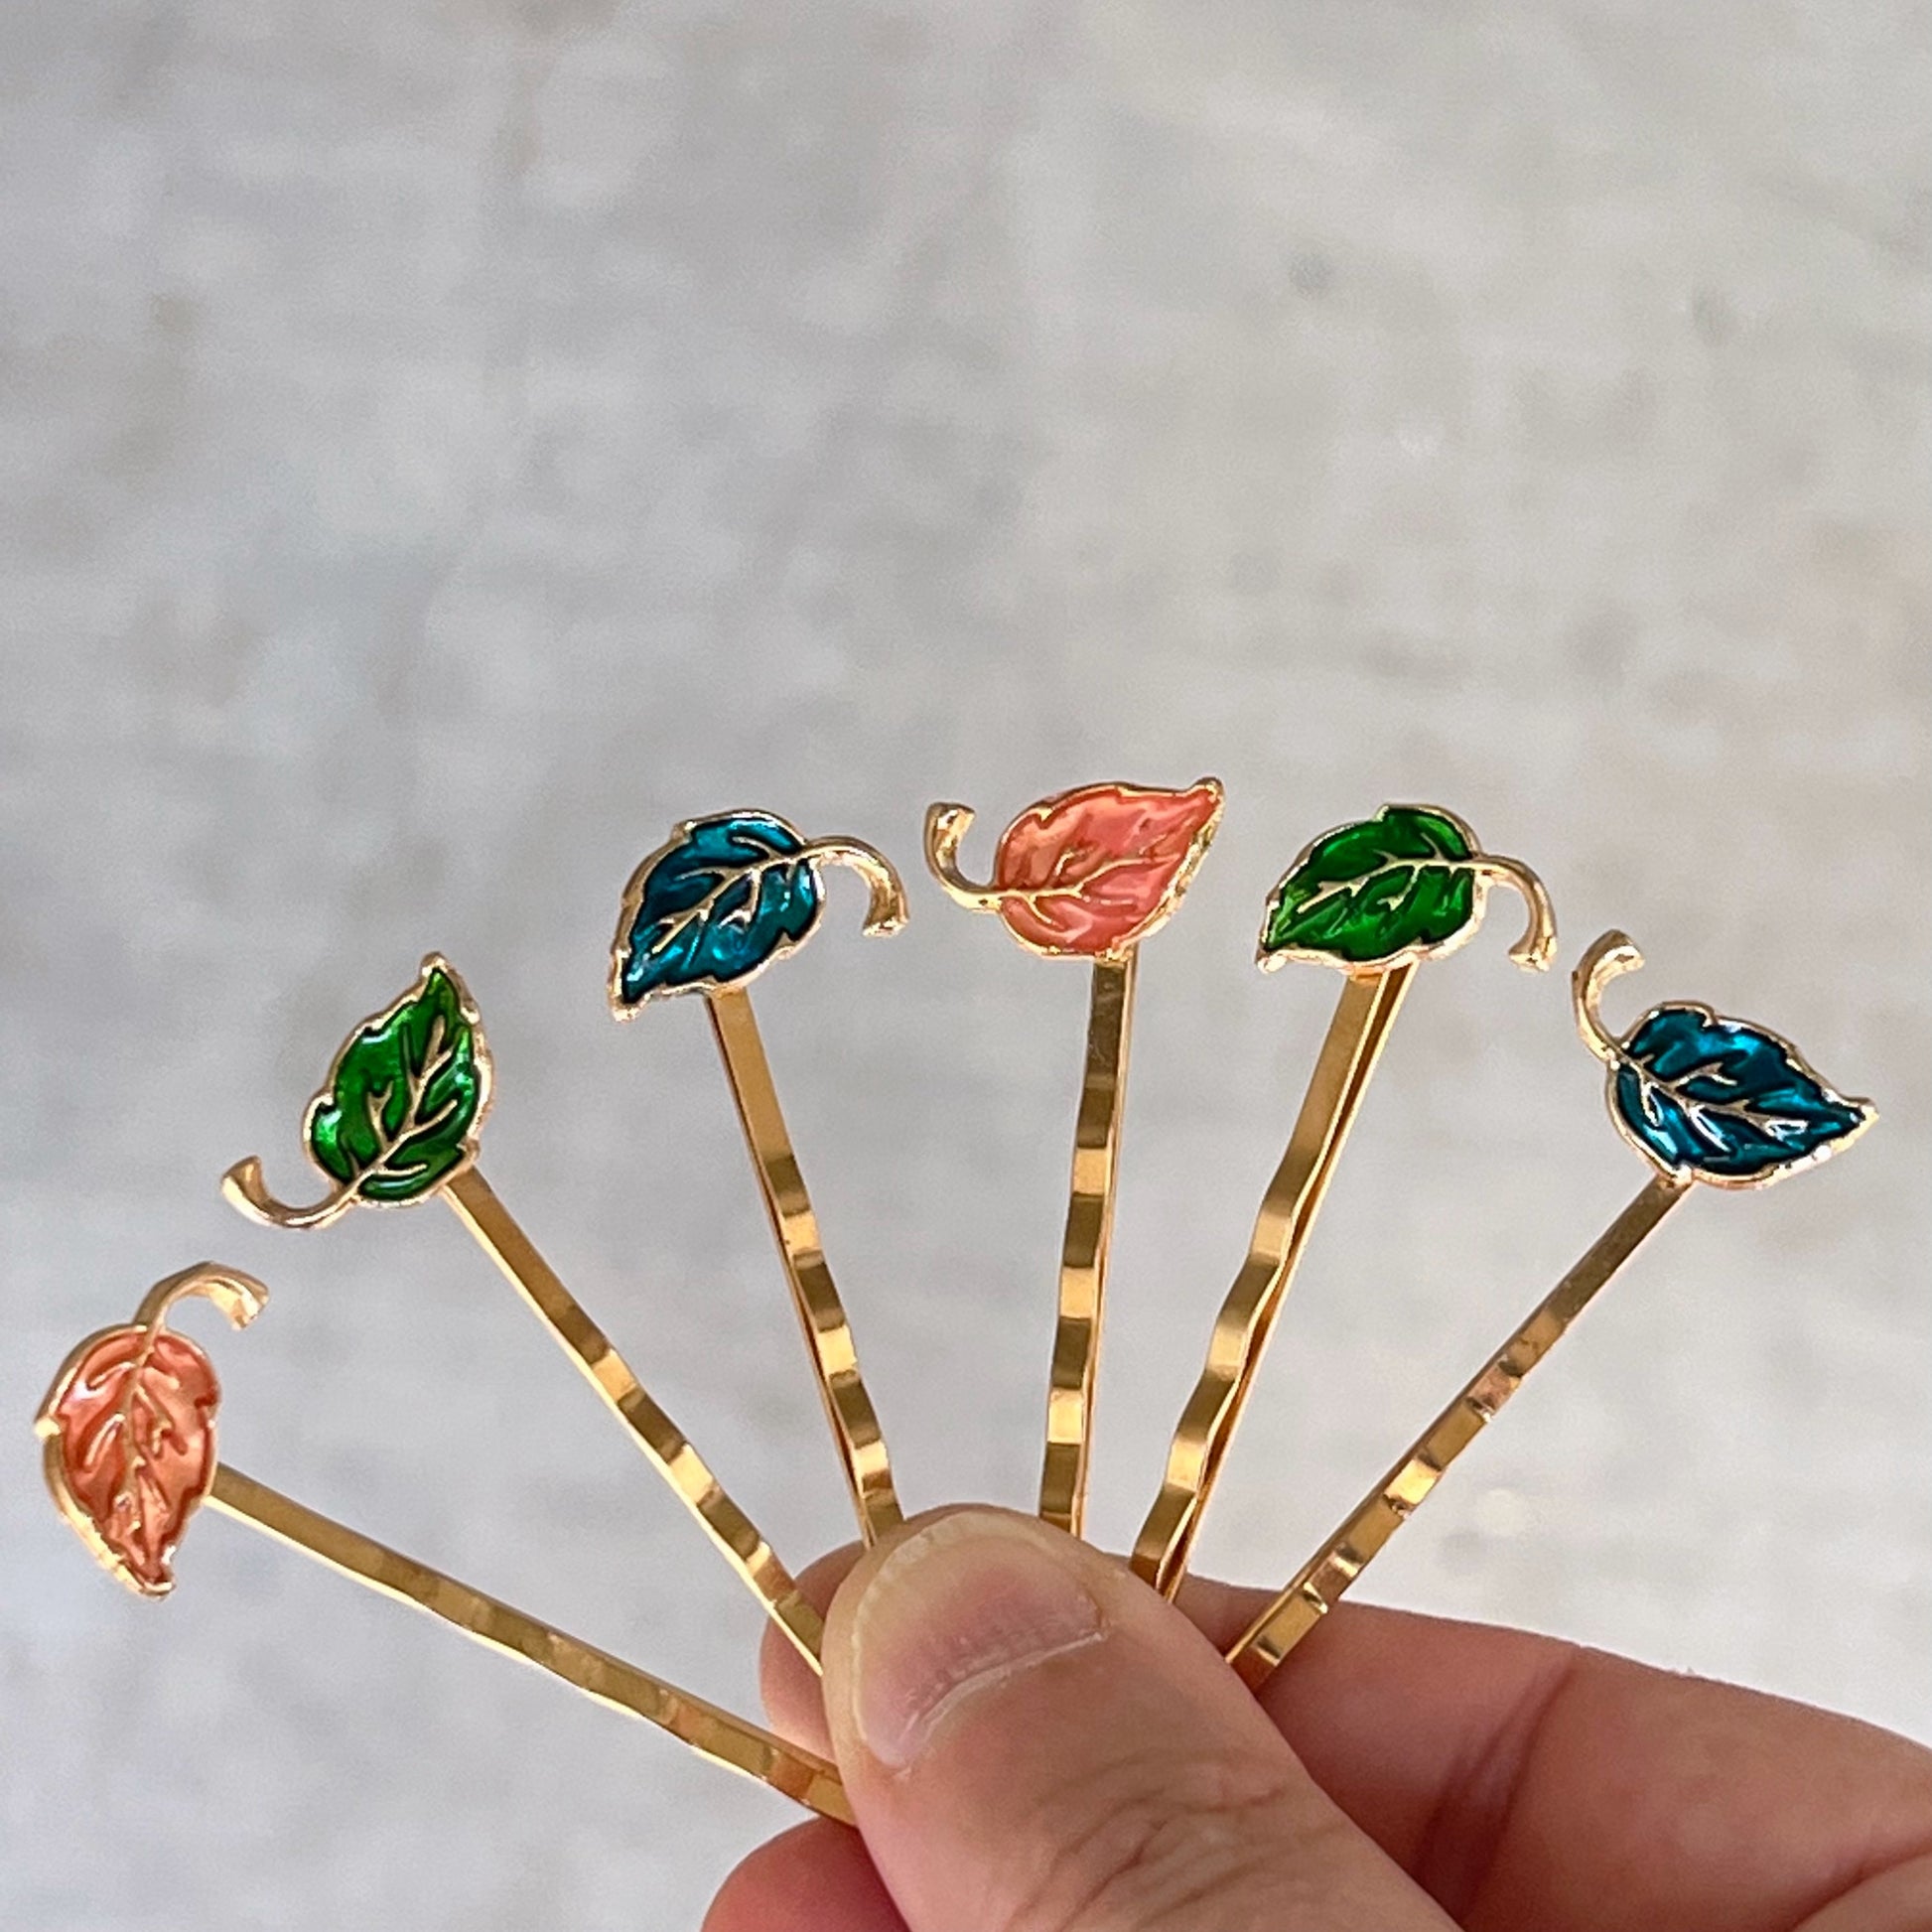 Enamel Leaf Hair Pins - Pink, Green & Blue - Colorful & Stylish Accessories